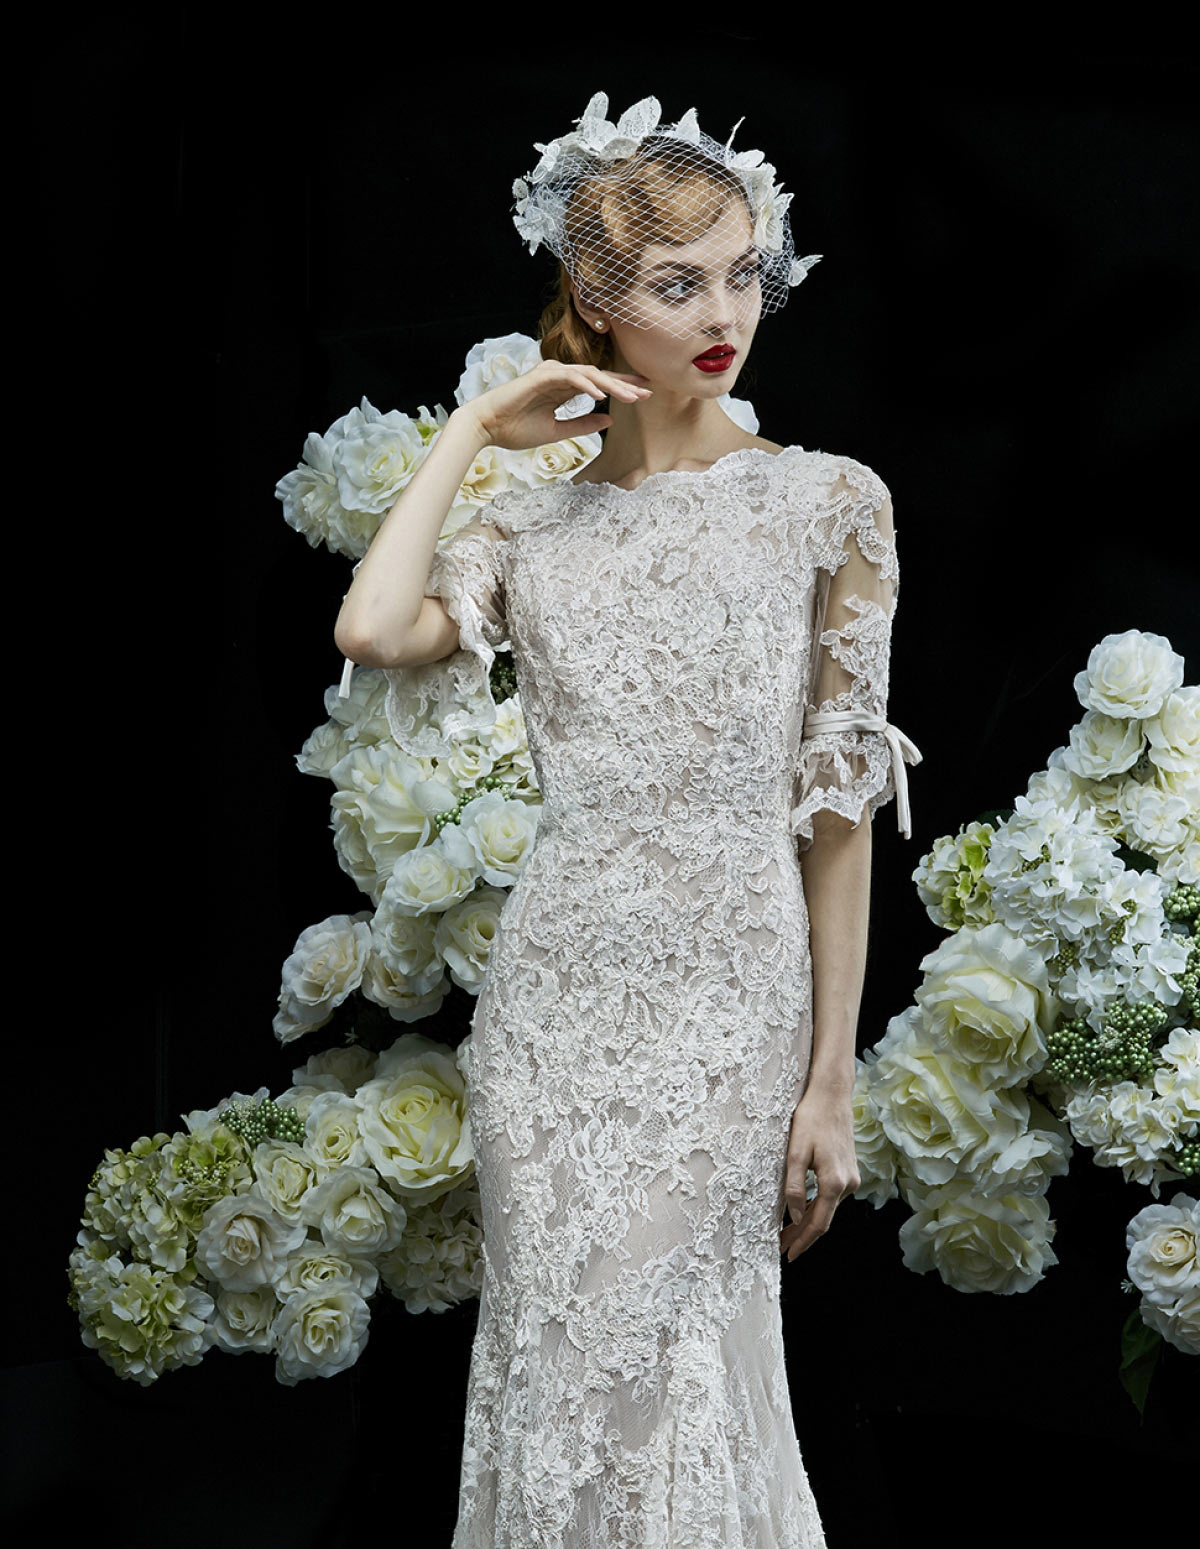 New Annasul Y gowns arrive at The Ivory Secret